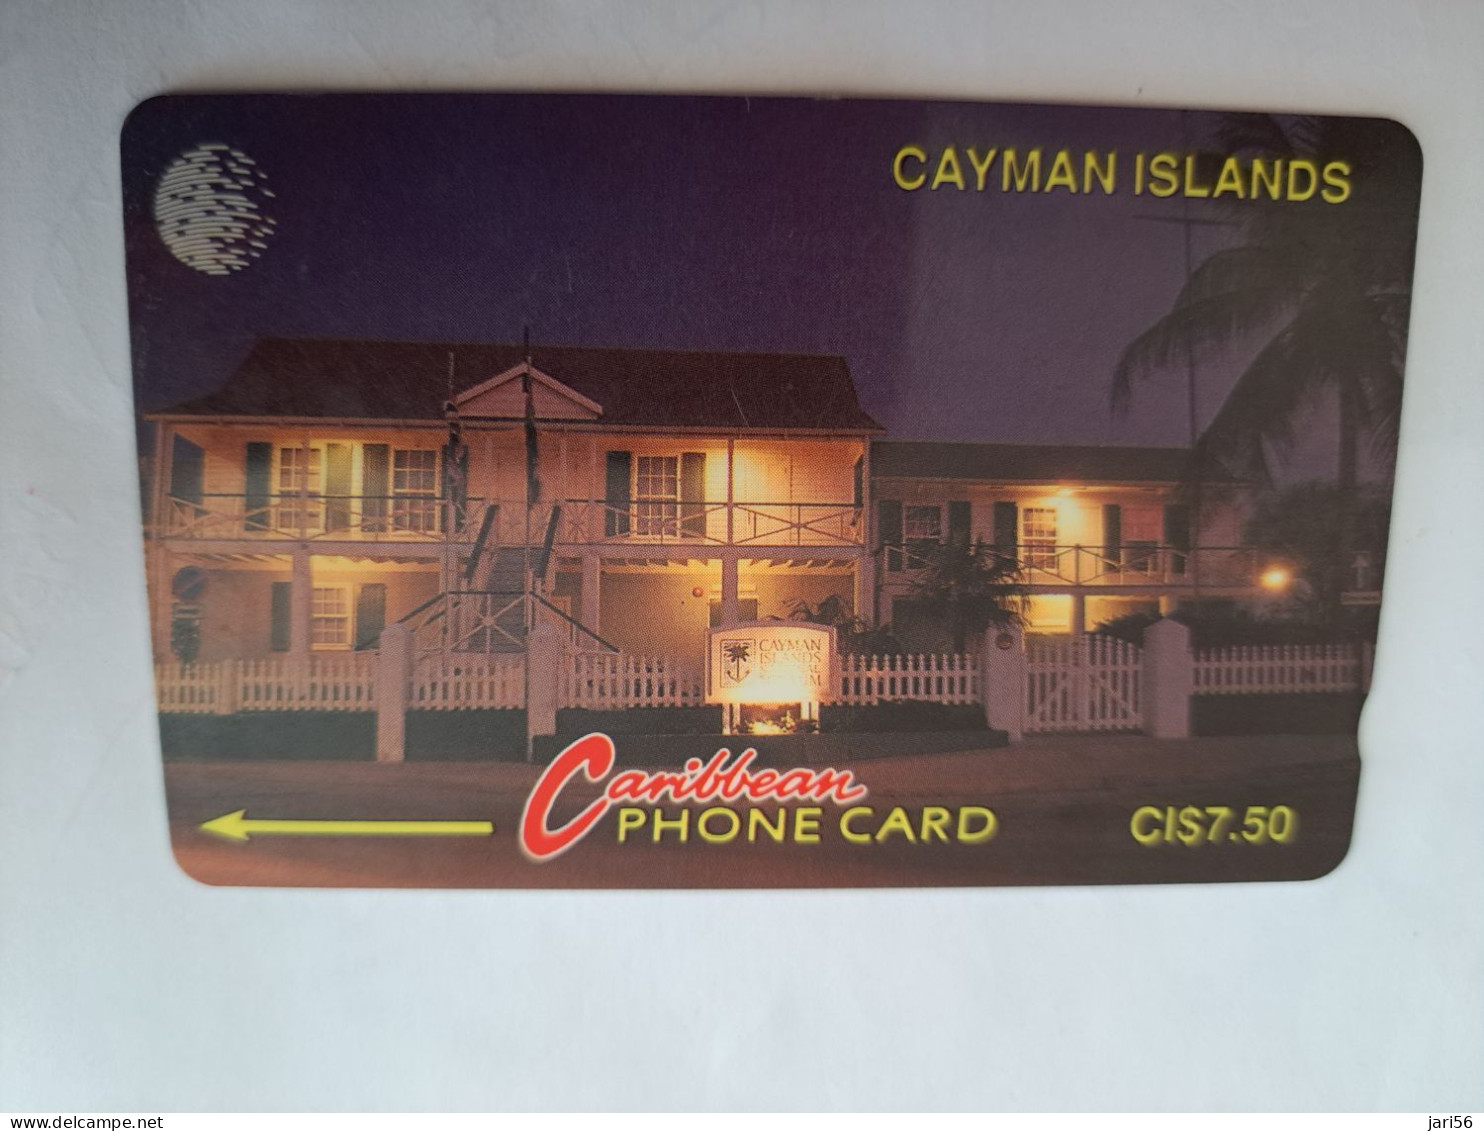 CAYMAN ISLANDS  CI $ 7,50  CAY-6C  CONTROL NR 6CCIC/SILVER/  MUSEUM AT NIGHT    NEW  LOGO     Fine Used Card  ** 14175** - Kaimaninseln (Cayman I.)